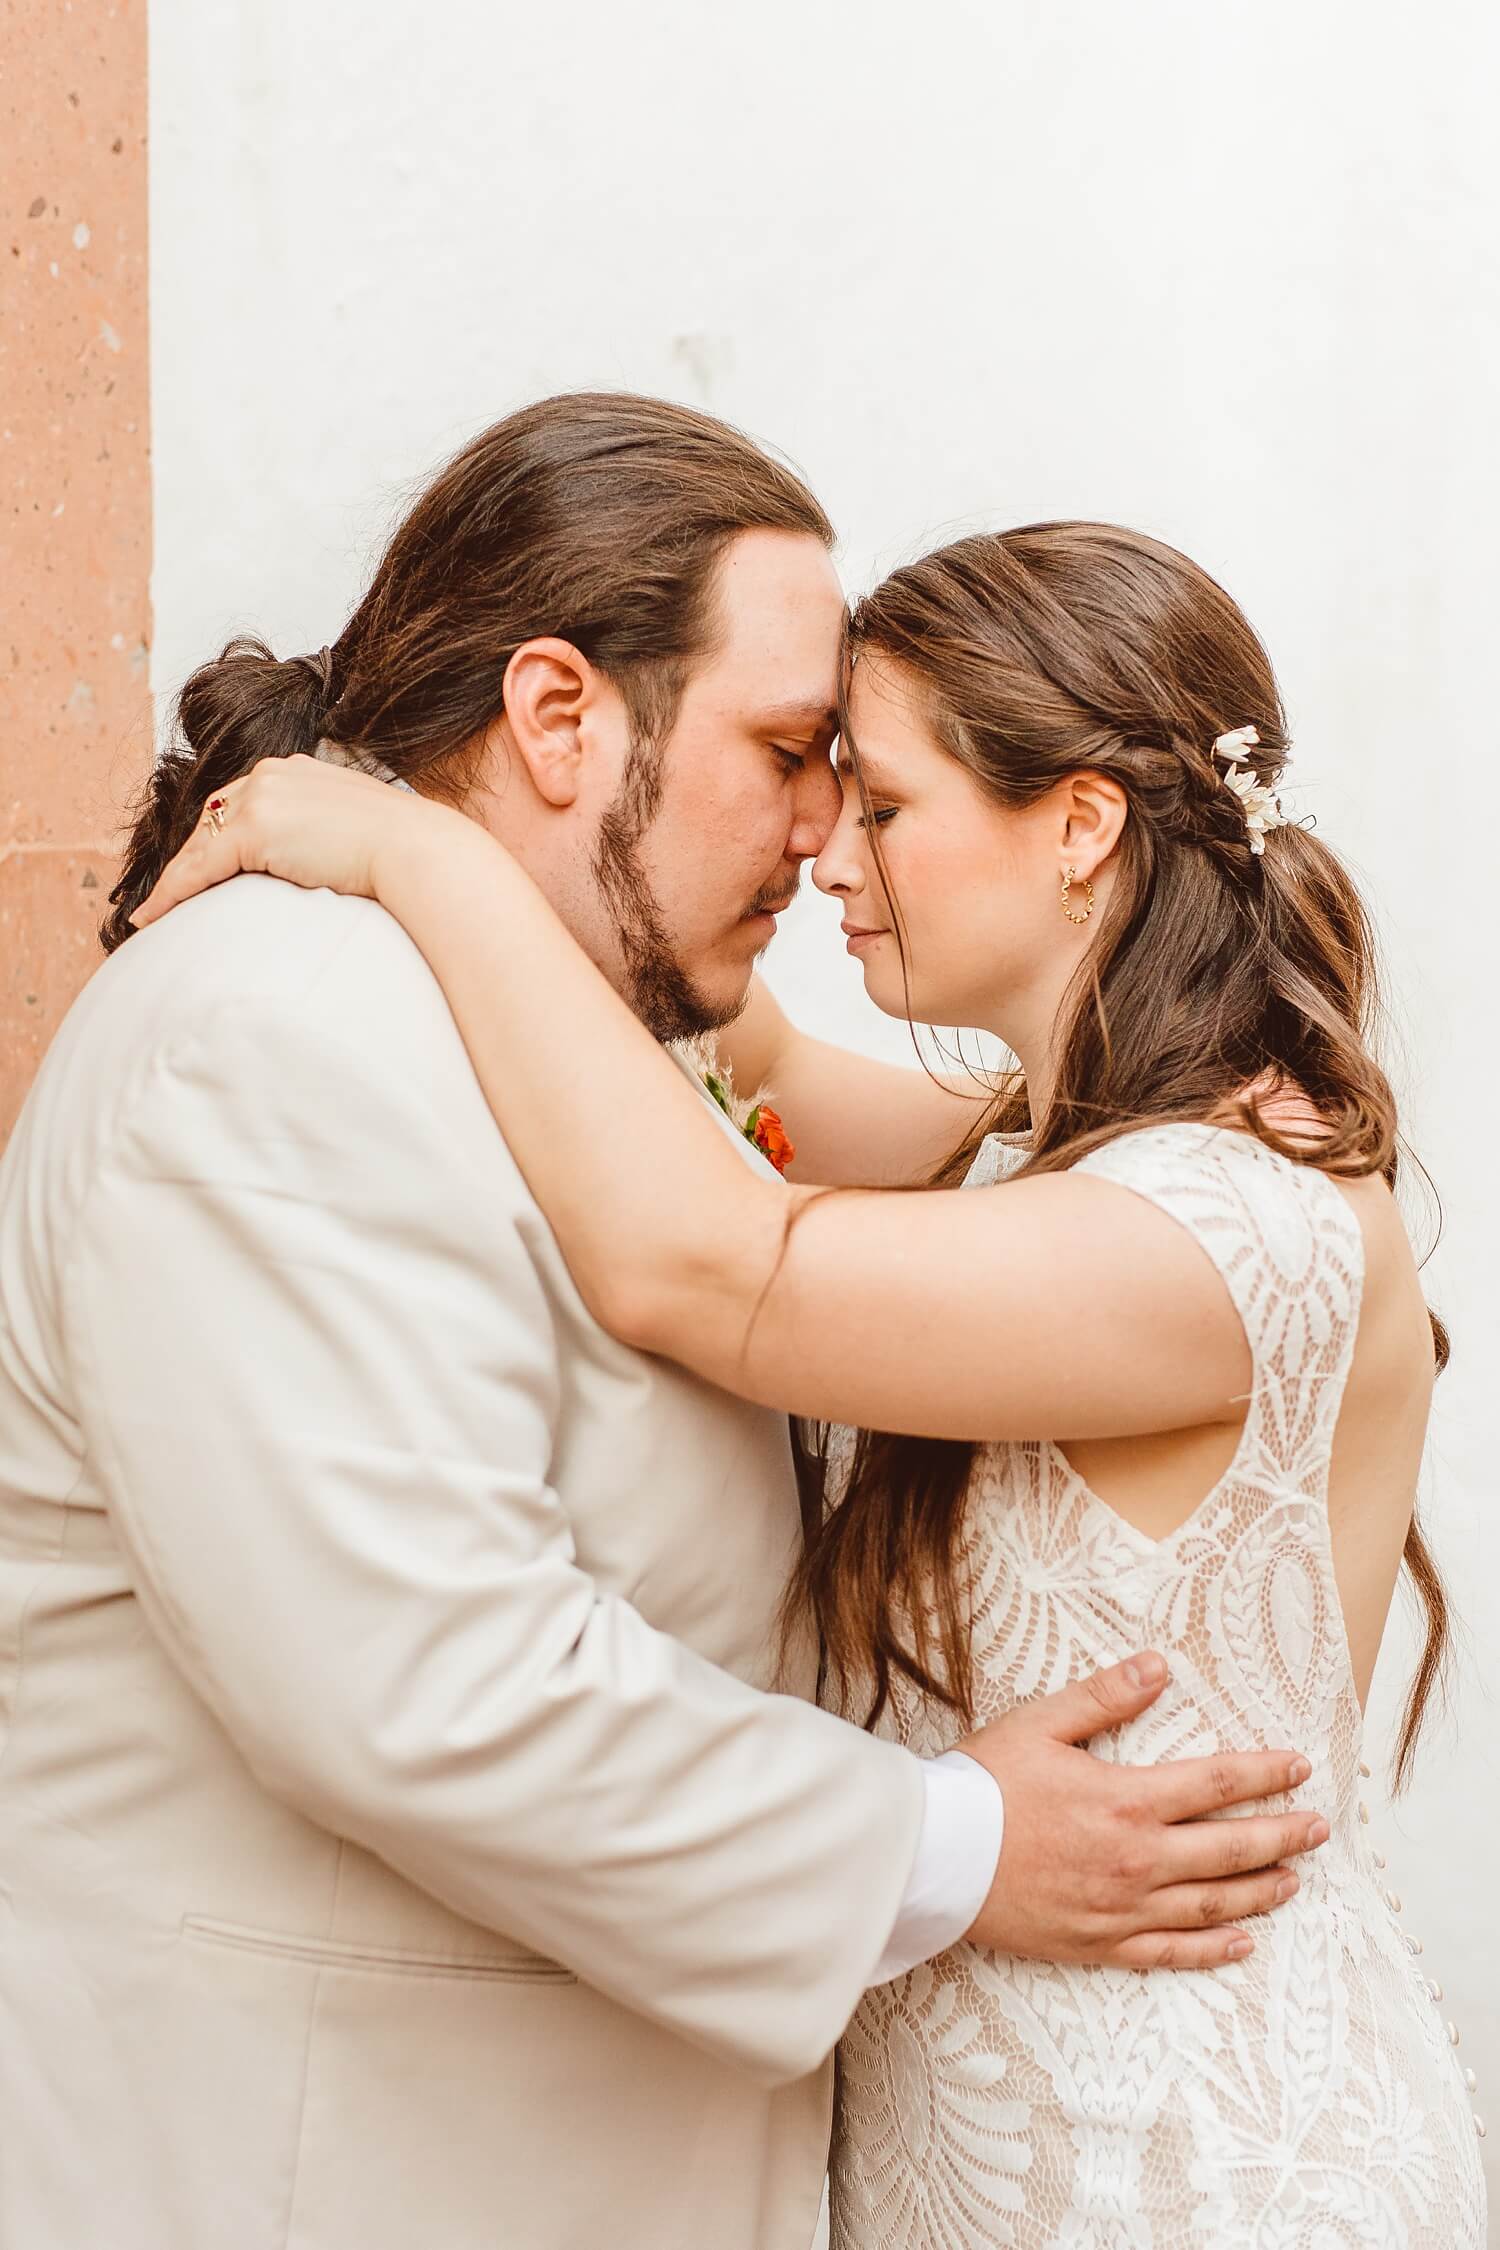 Bride and groom placing foreheads together at Mexico destination wedding | Brooke Michelle Photo